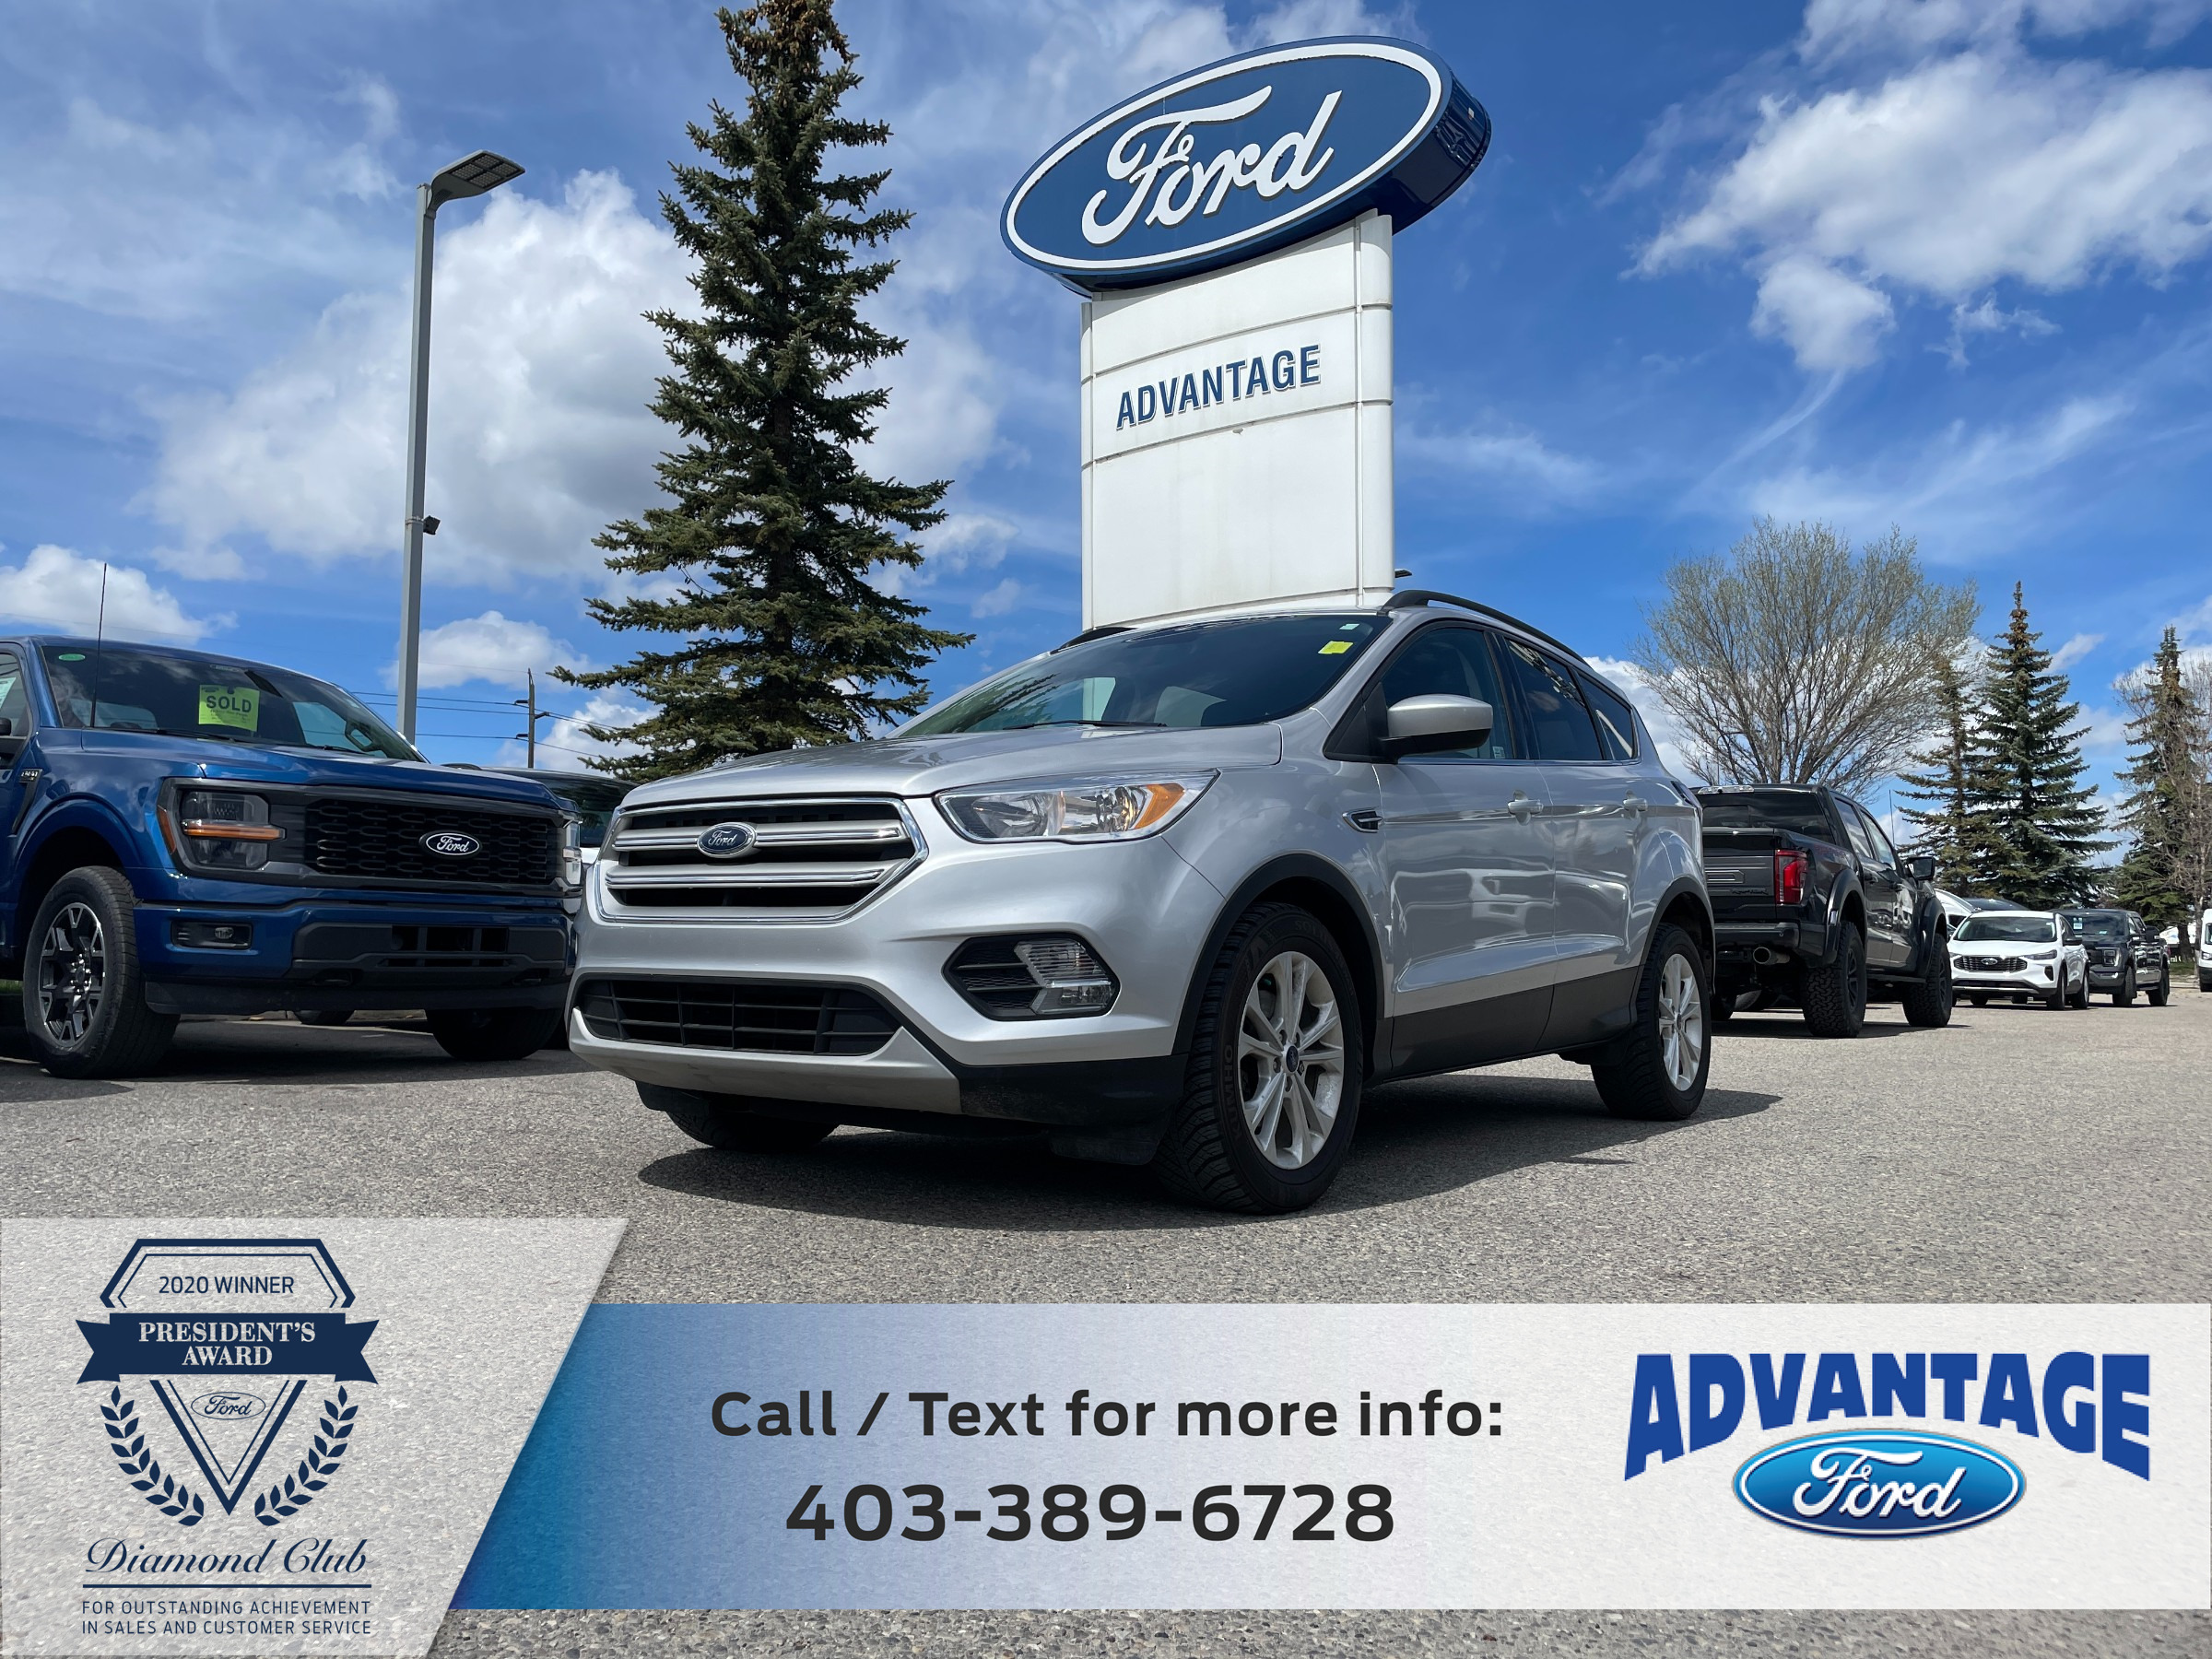 2018 Ford Escape SE BSW Tires, Reverse Camera System, Keyless Entry